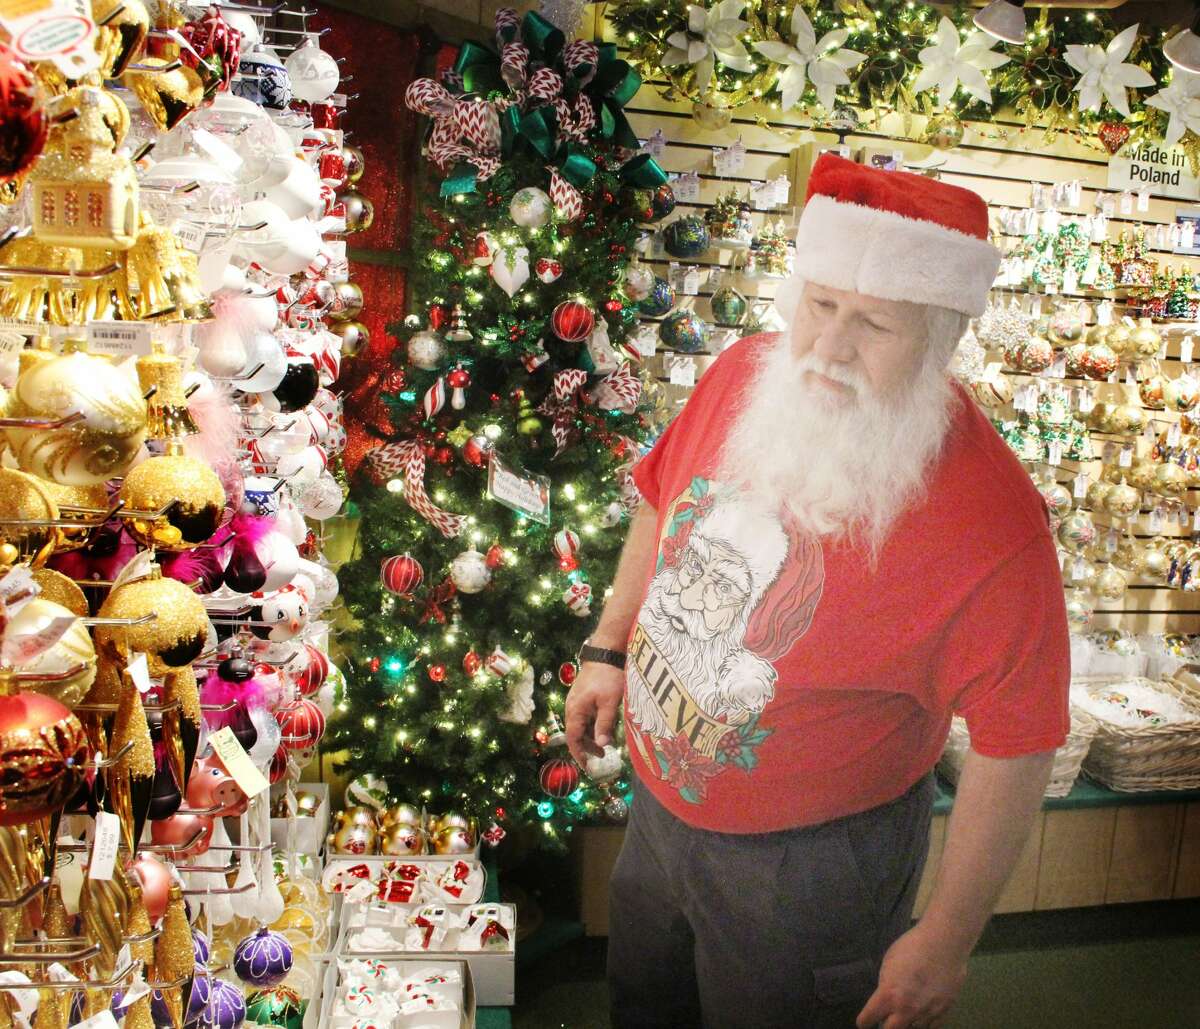 David York, of Youngstown, Ohio looks over ornaments and Christmas decorations at Bronner’s CHRISTmas Wonderland in Frankenmueth, Michigan. York started portraying Santa about nine years ago, and has adopted it as a year-round lifestyle. He and other Christmas fanatics are drawn to the store, which features approximately 50,000 holiday items for sale.